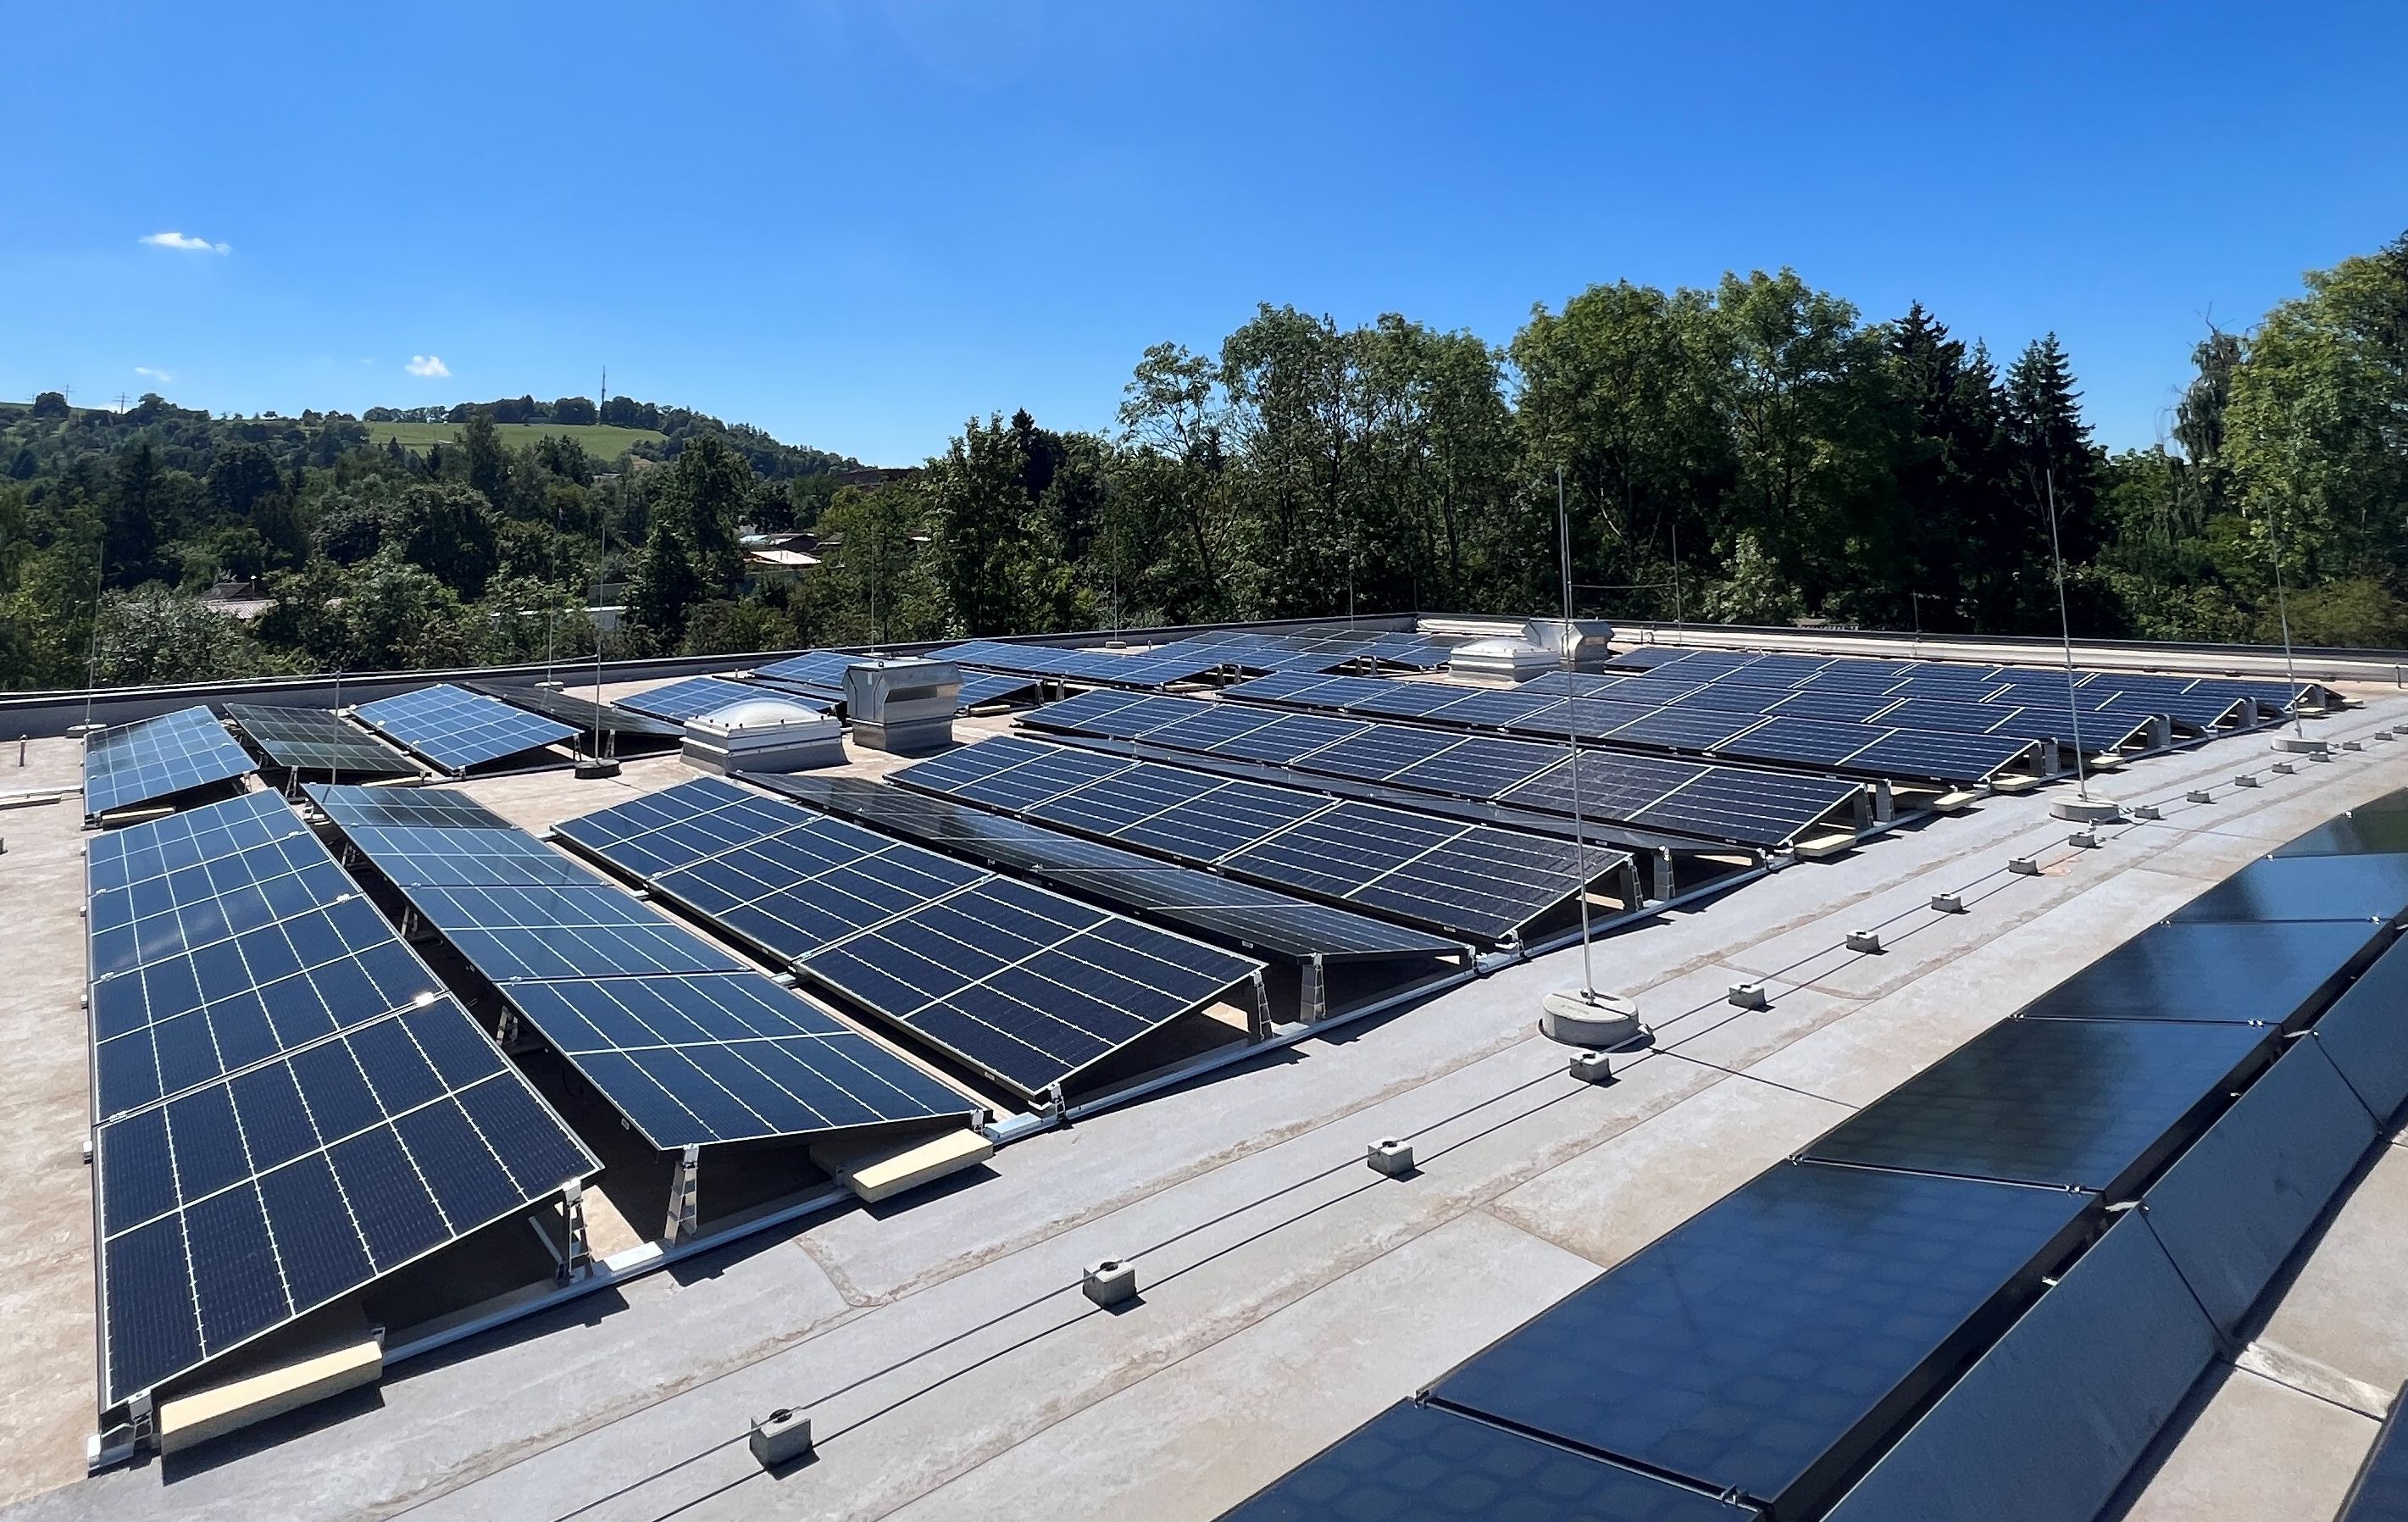 Third Photovoltaic Plant In Operation